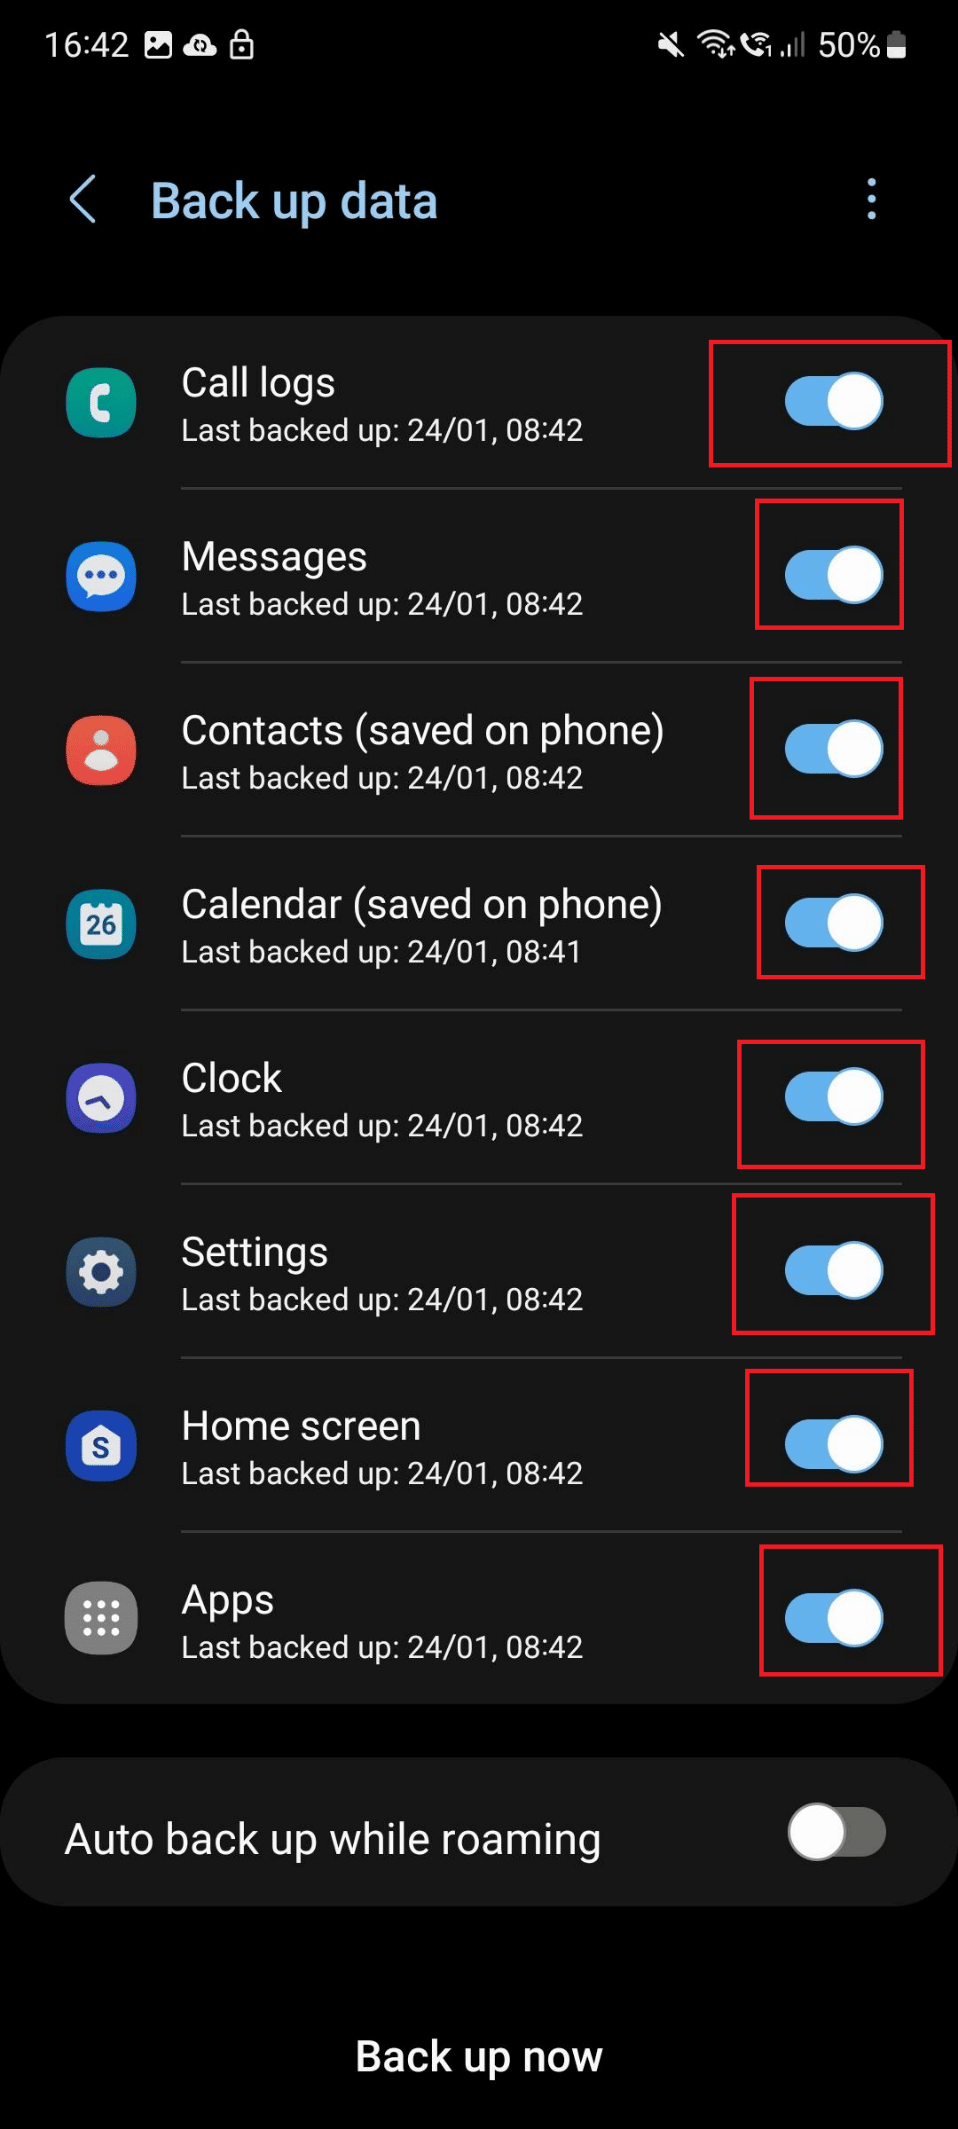 toggle on apps for data back up